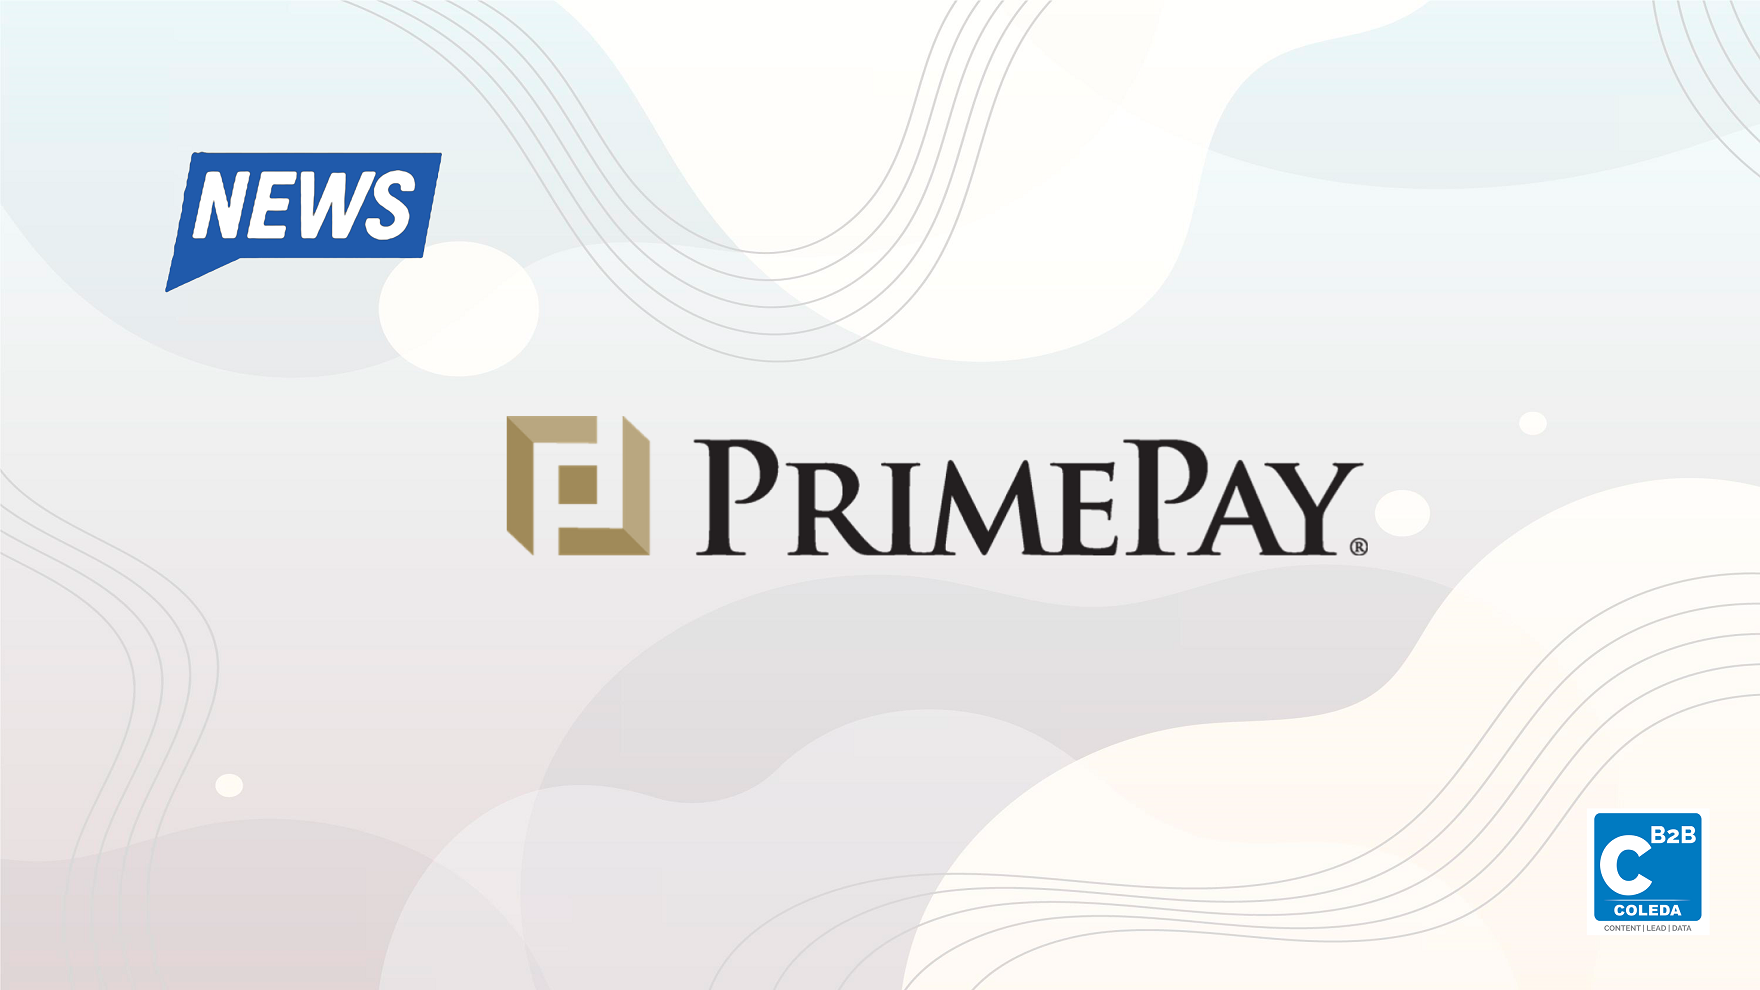 PrimePay ProfitKeeper gets selected by Great Clips Inc to support franchisees and increase the profitability